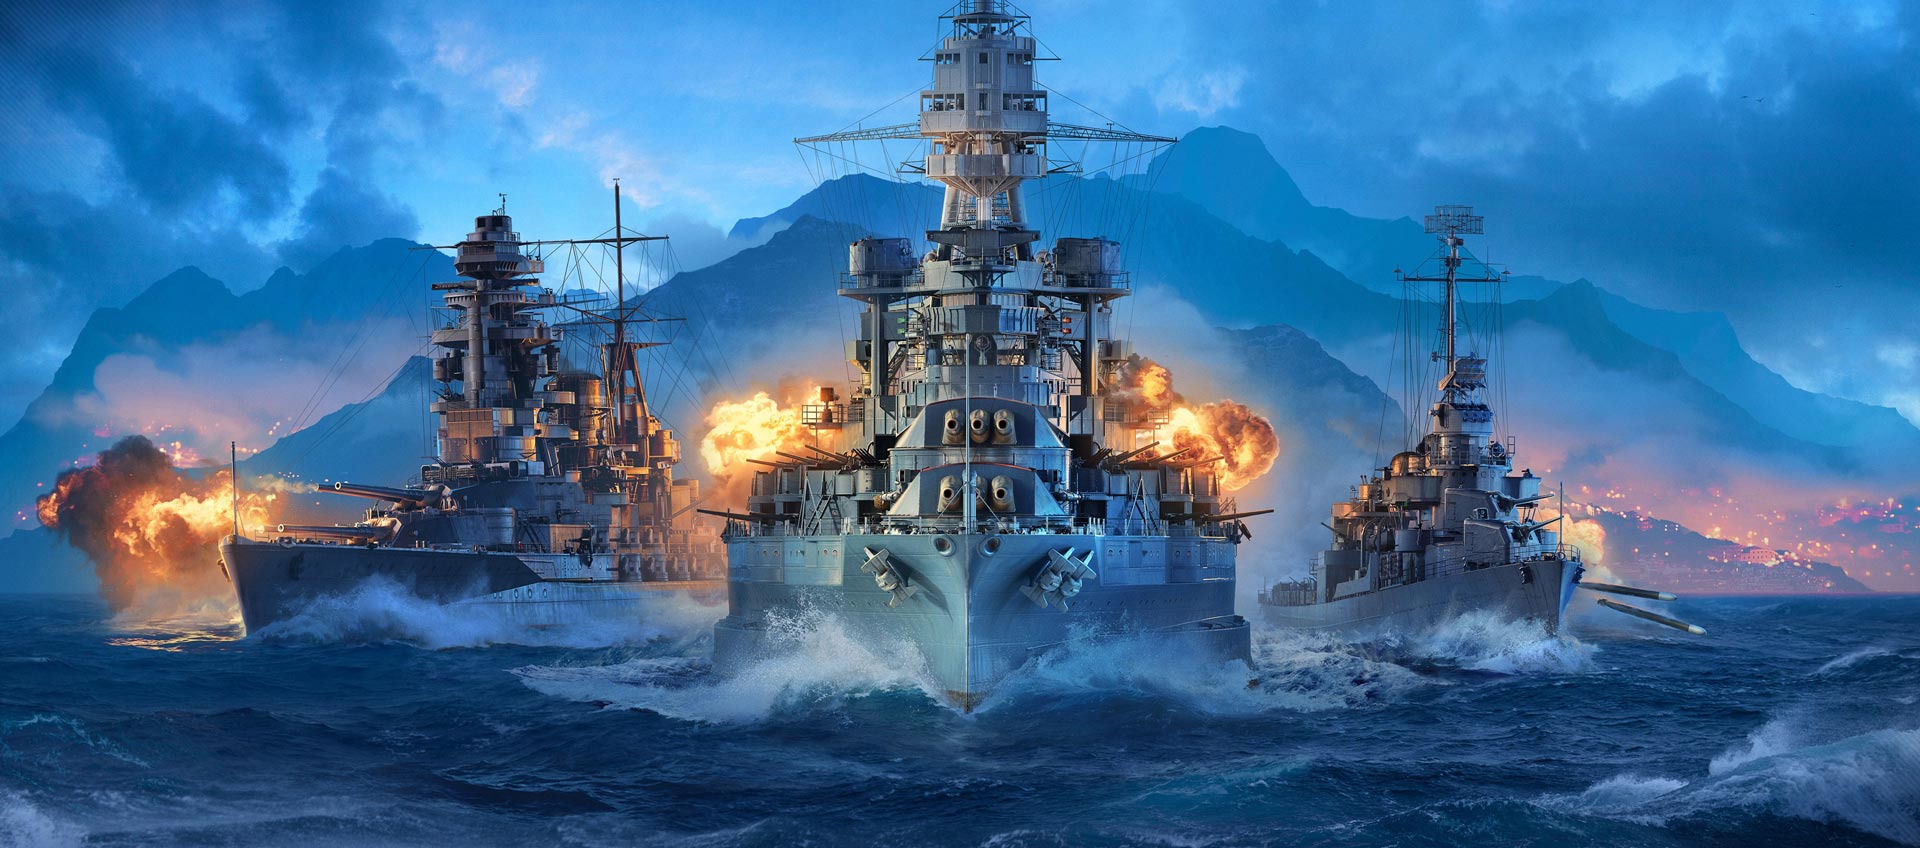 Avance de World of Warships Legends para PS4 y Xbox One HobbyConsolas